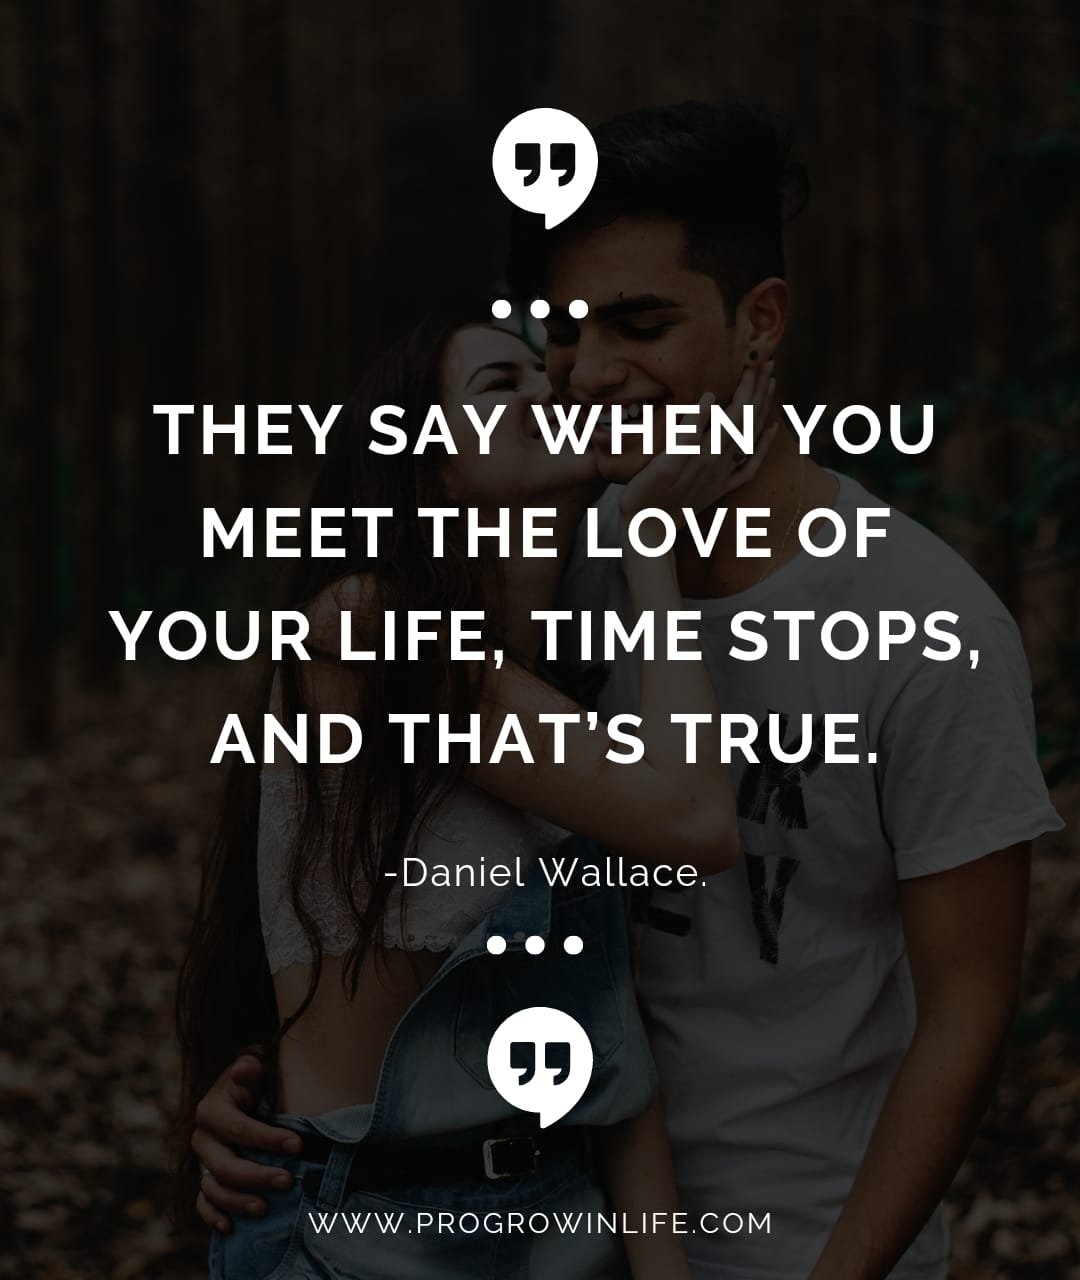 Love quotes for him are short and sweet.